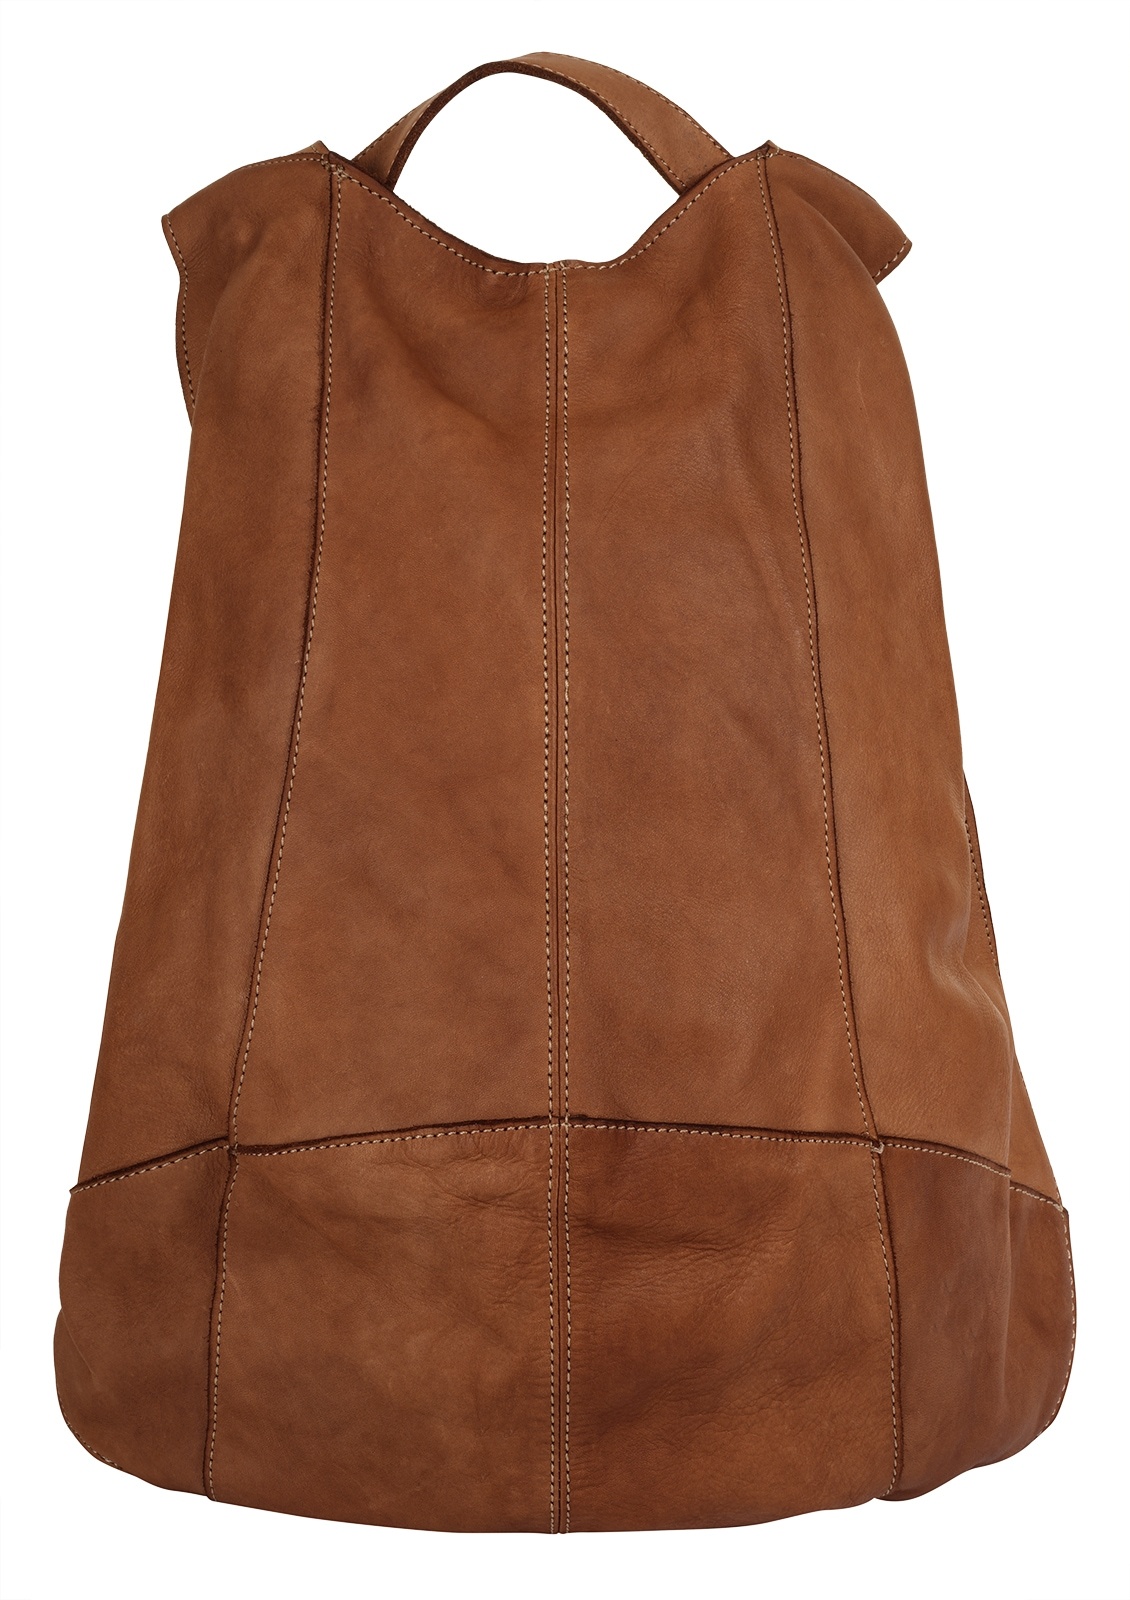 forty° Tagesrucksack forty° cognac B/T: 33 cm x 5 cm